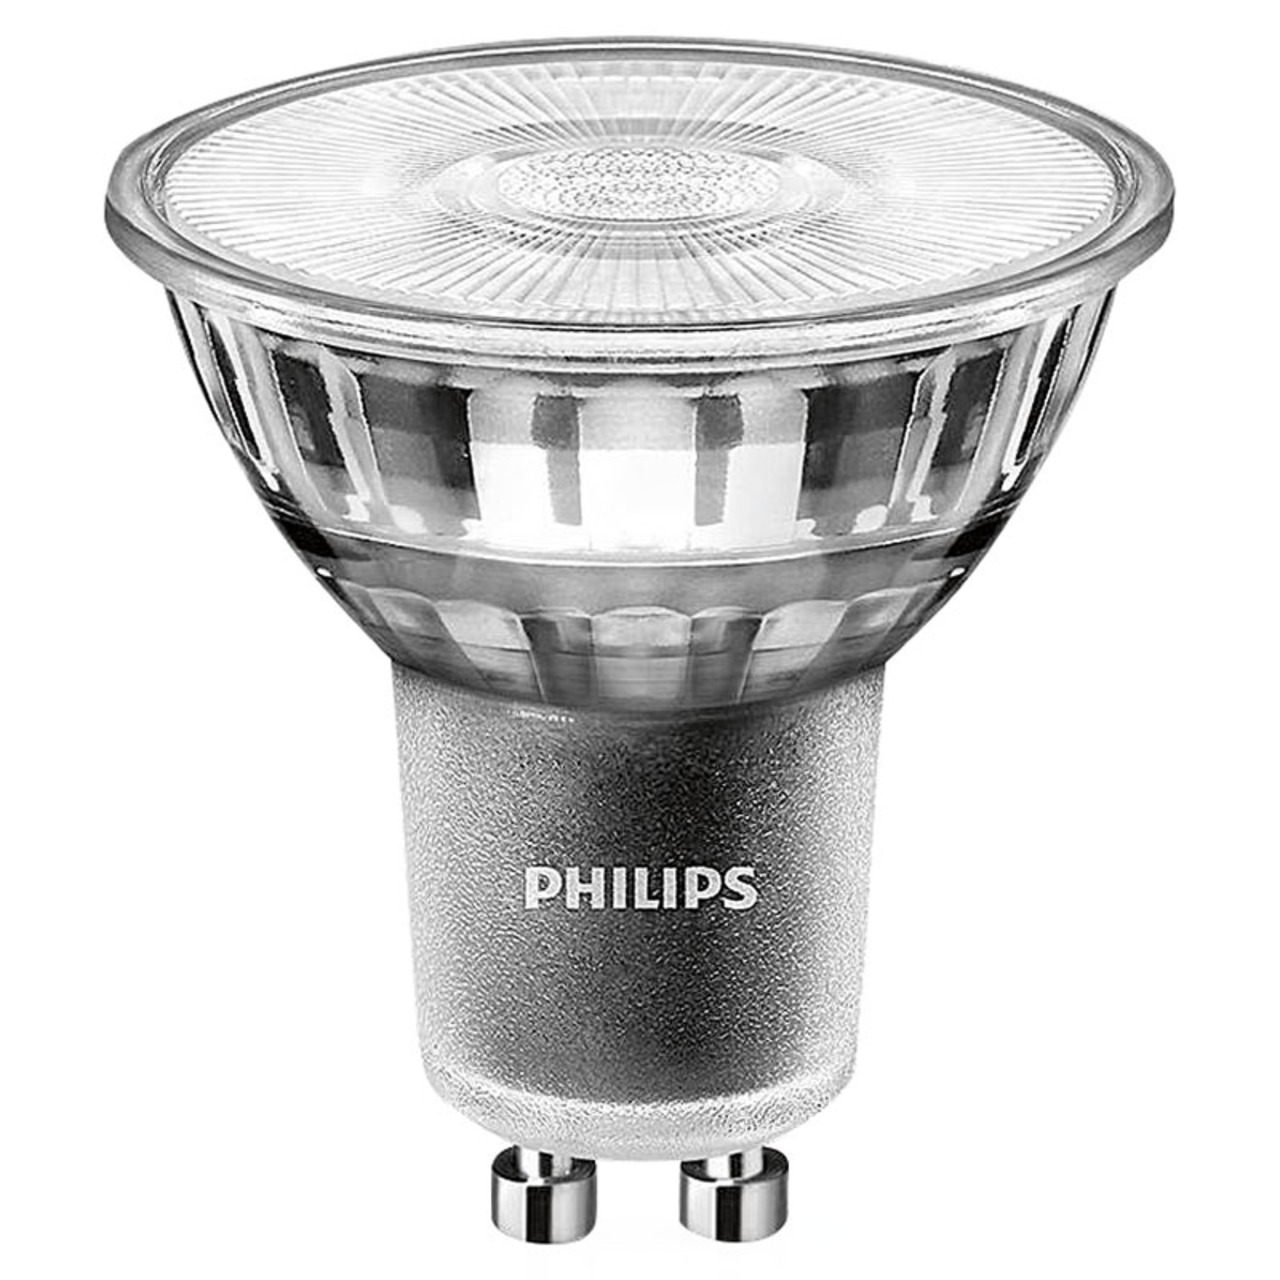 Philips MASTER ExpertColor 3-9-W-GU10-LED-Lampe- 97 Ra- 2700K- warmweiss- dimmbar